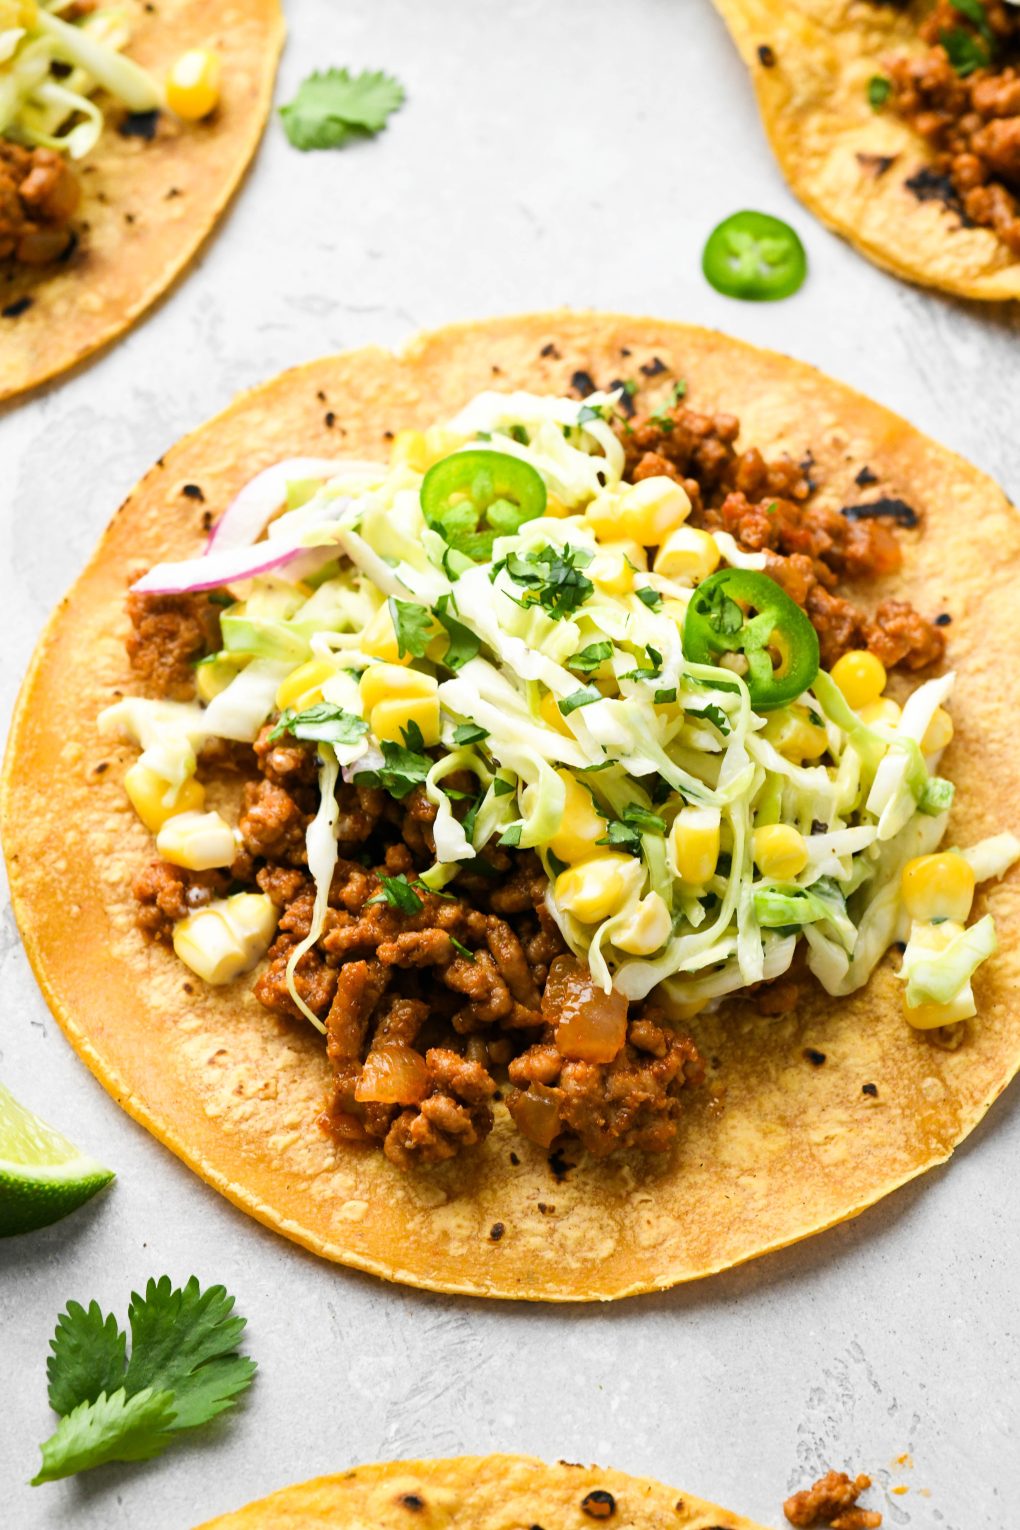 Detailed side angle view of a single ground pork taco laid out on a concrete surface, topped with a creamy cabbage and corn slaw, with jalapeño, cilantro, and lime wedges.